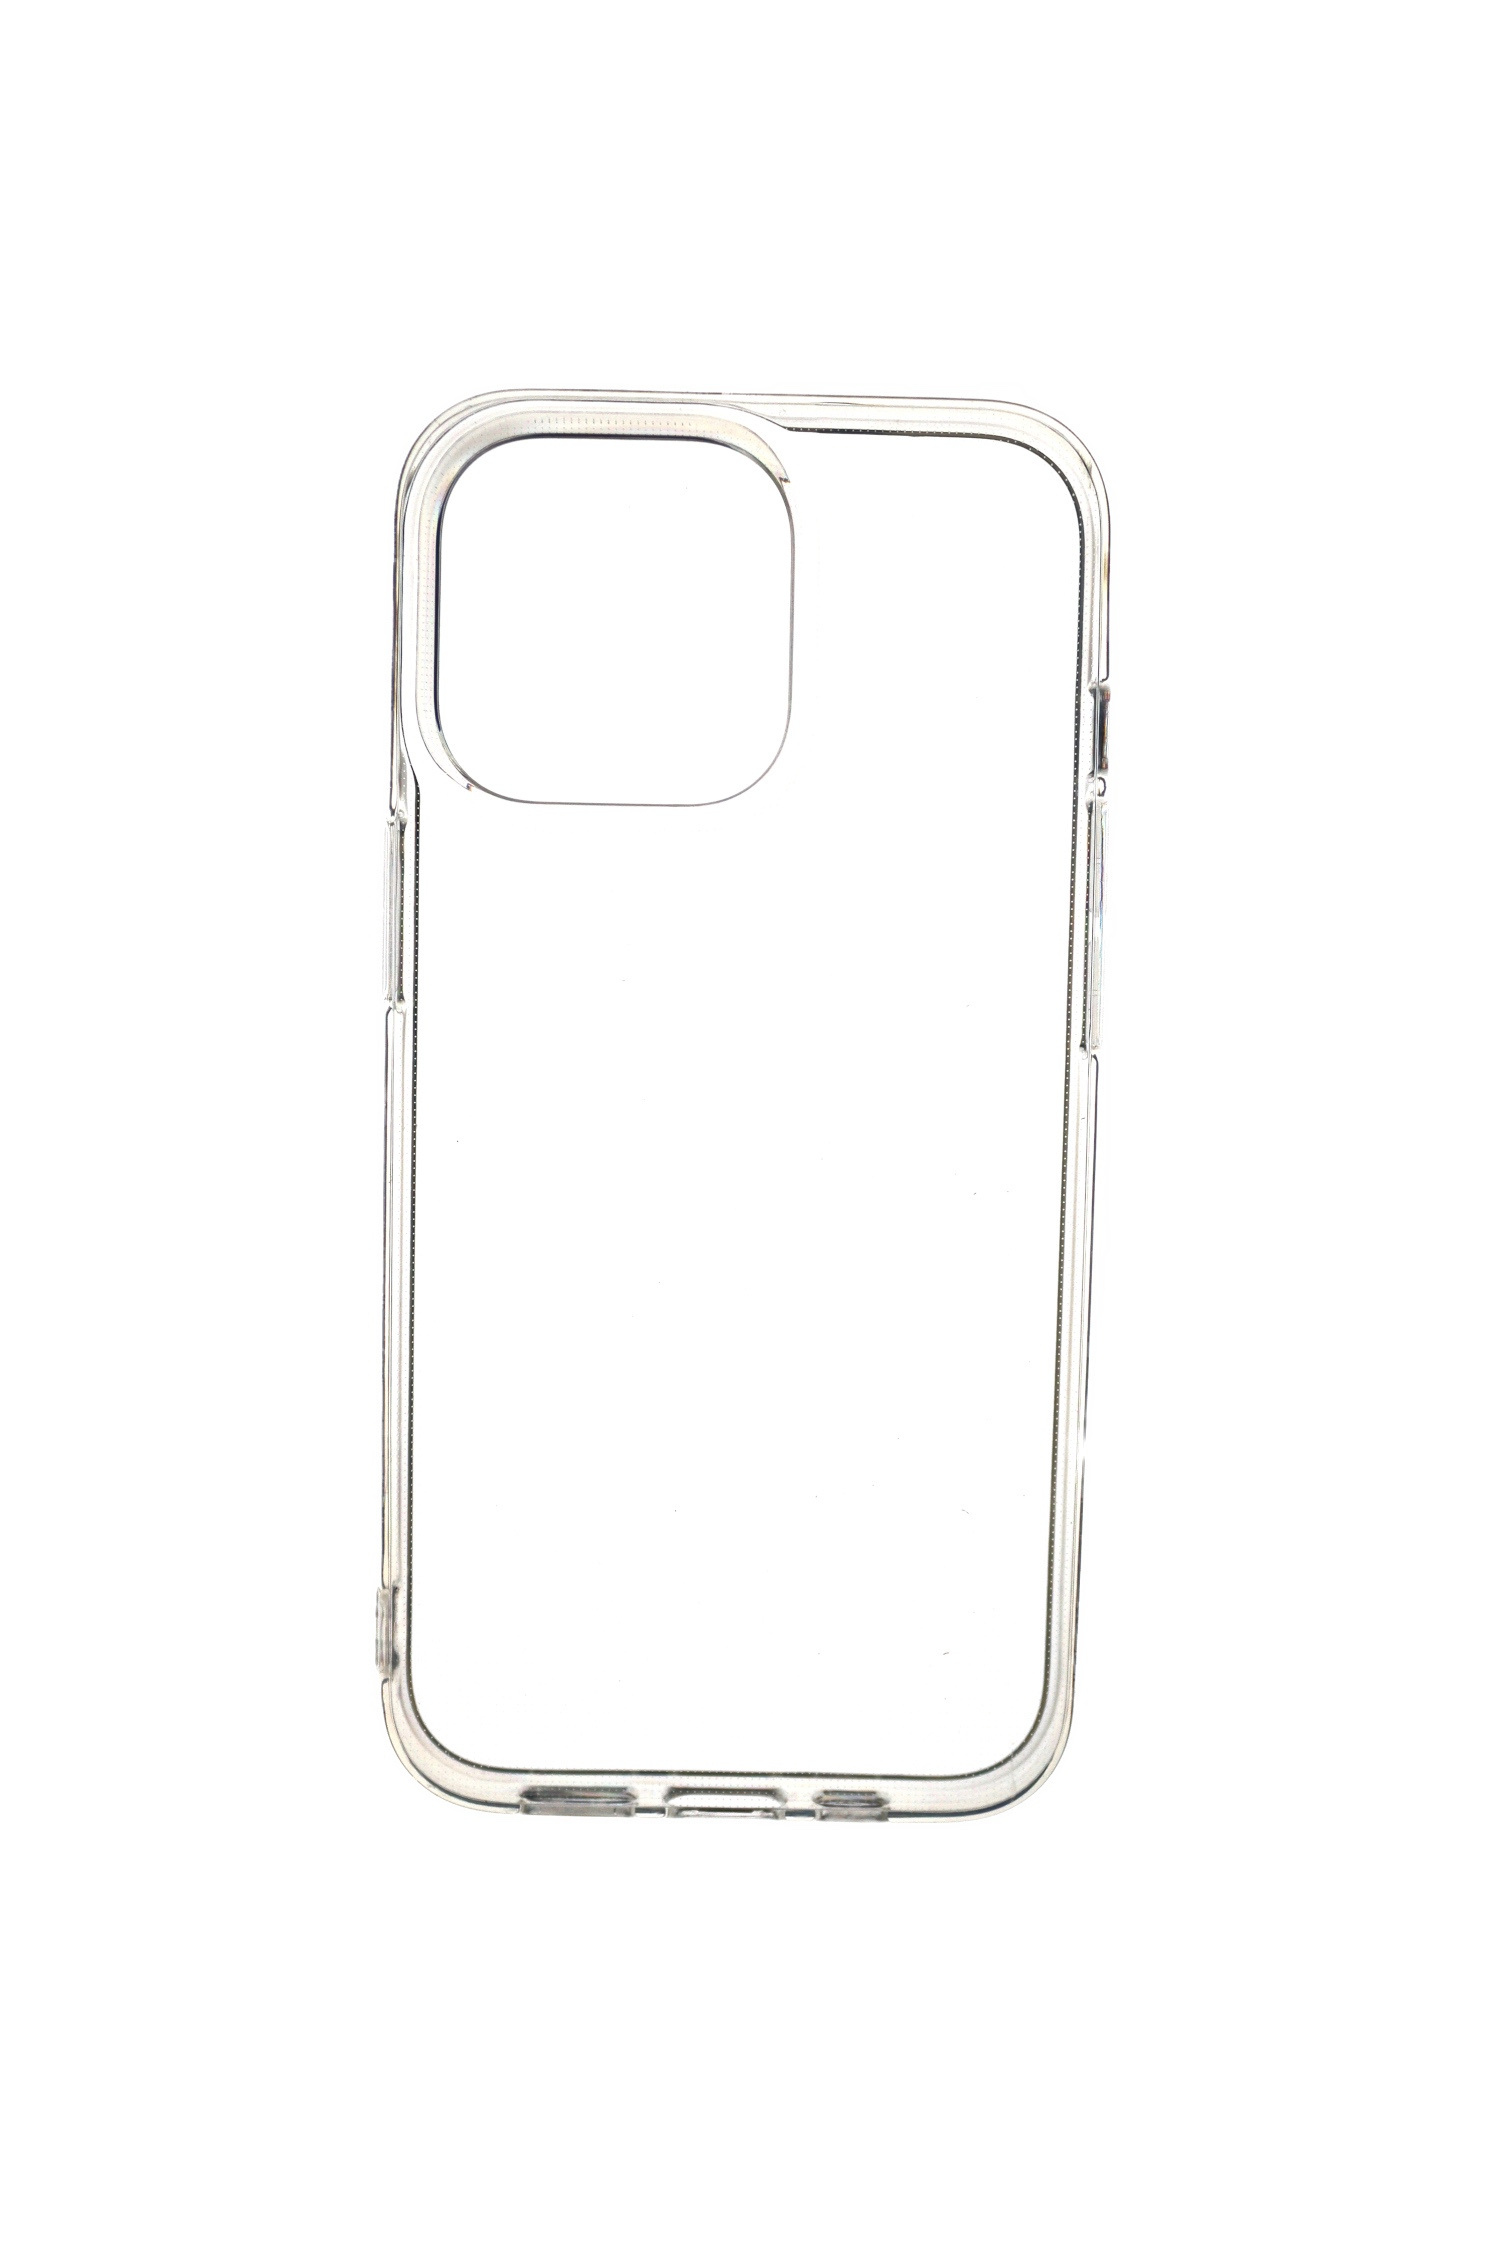 JAMCOVER 2.0 mm TPU Case Max, Apple, iPhone Backcover, Transparent Strong, Pro 14